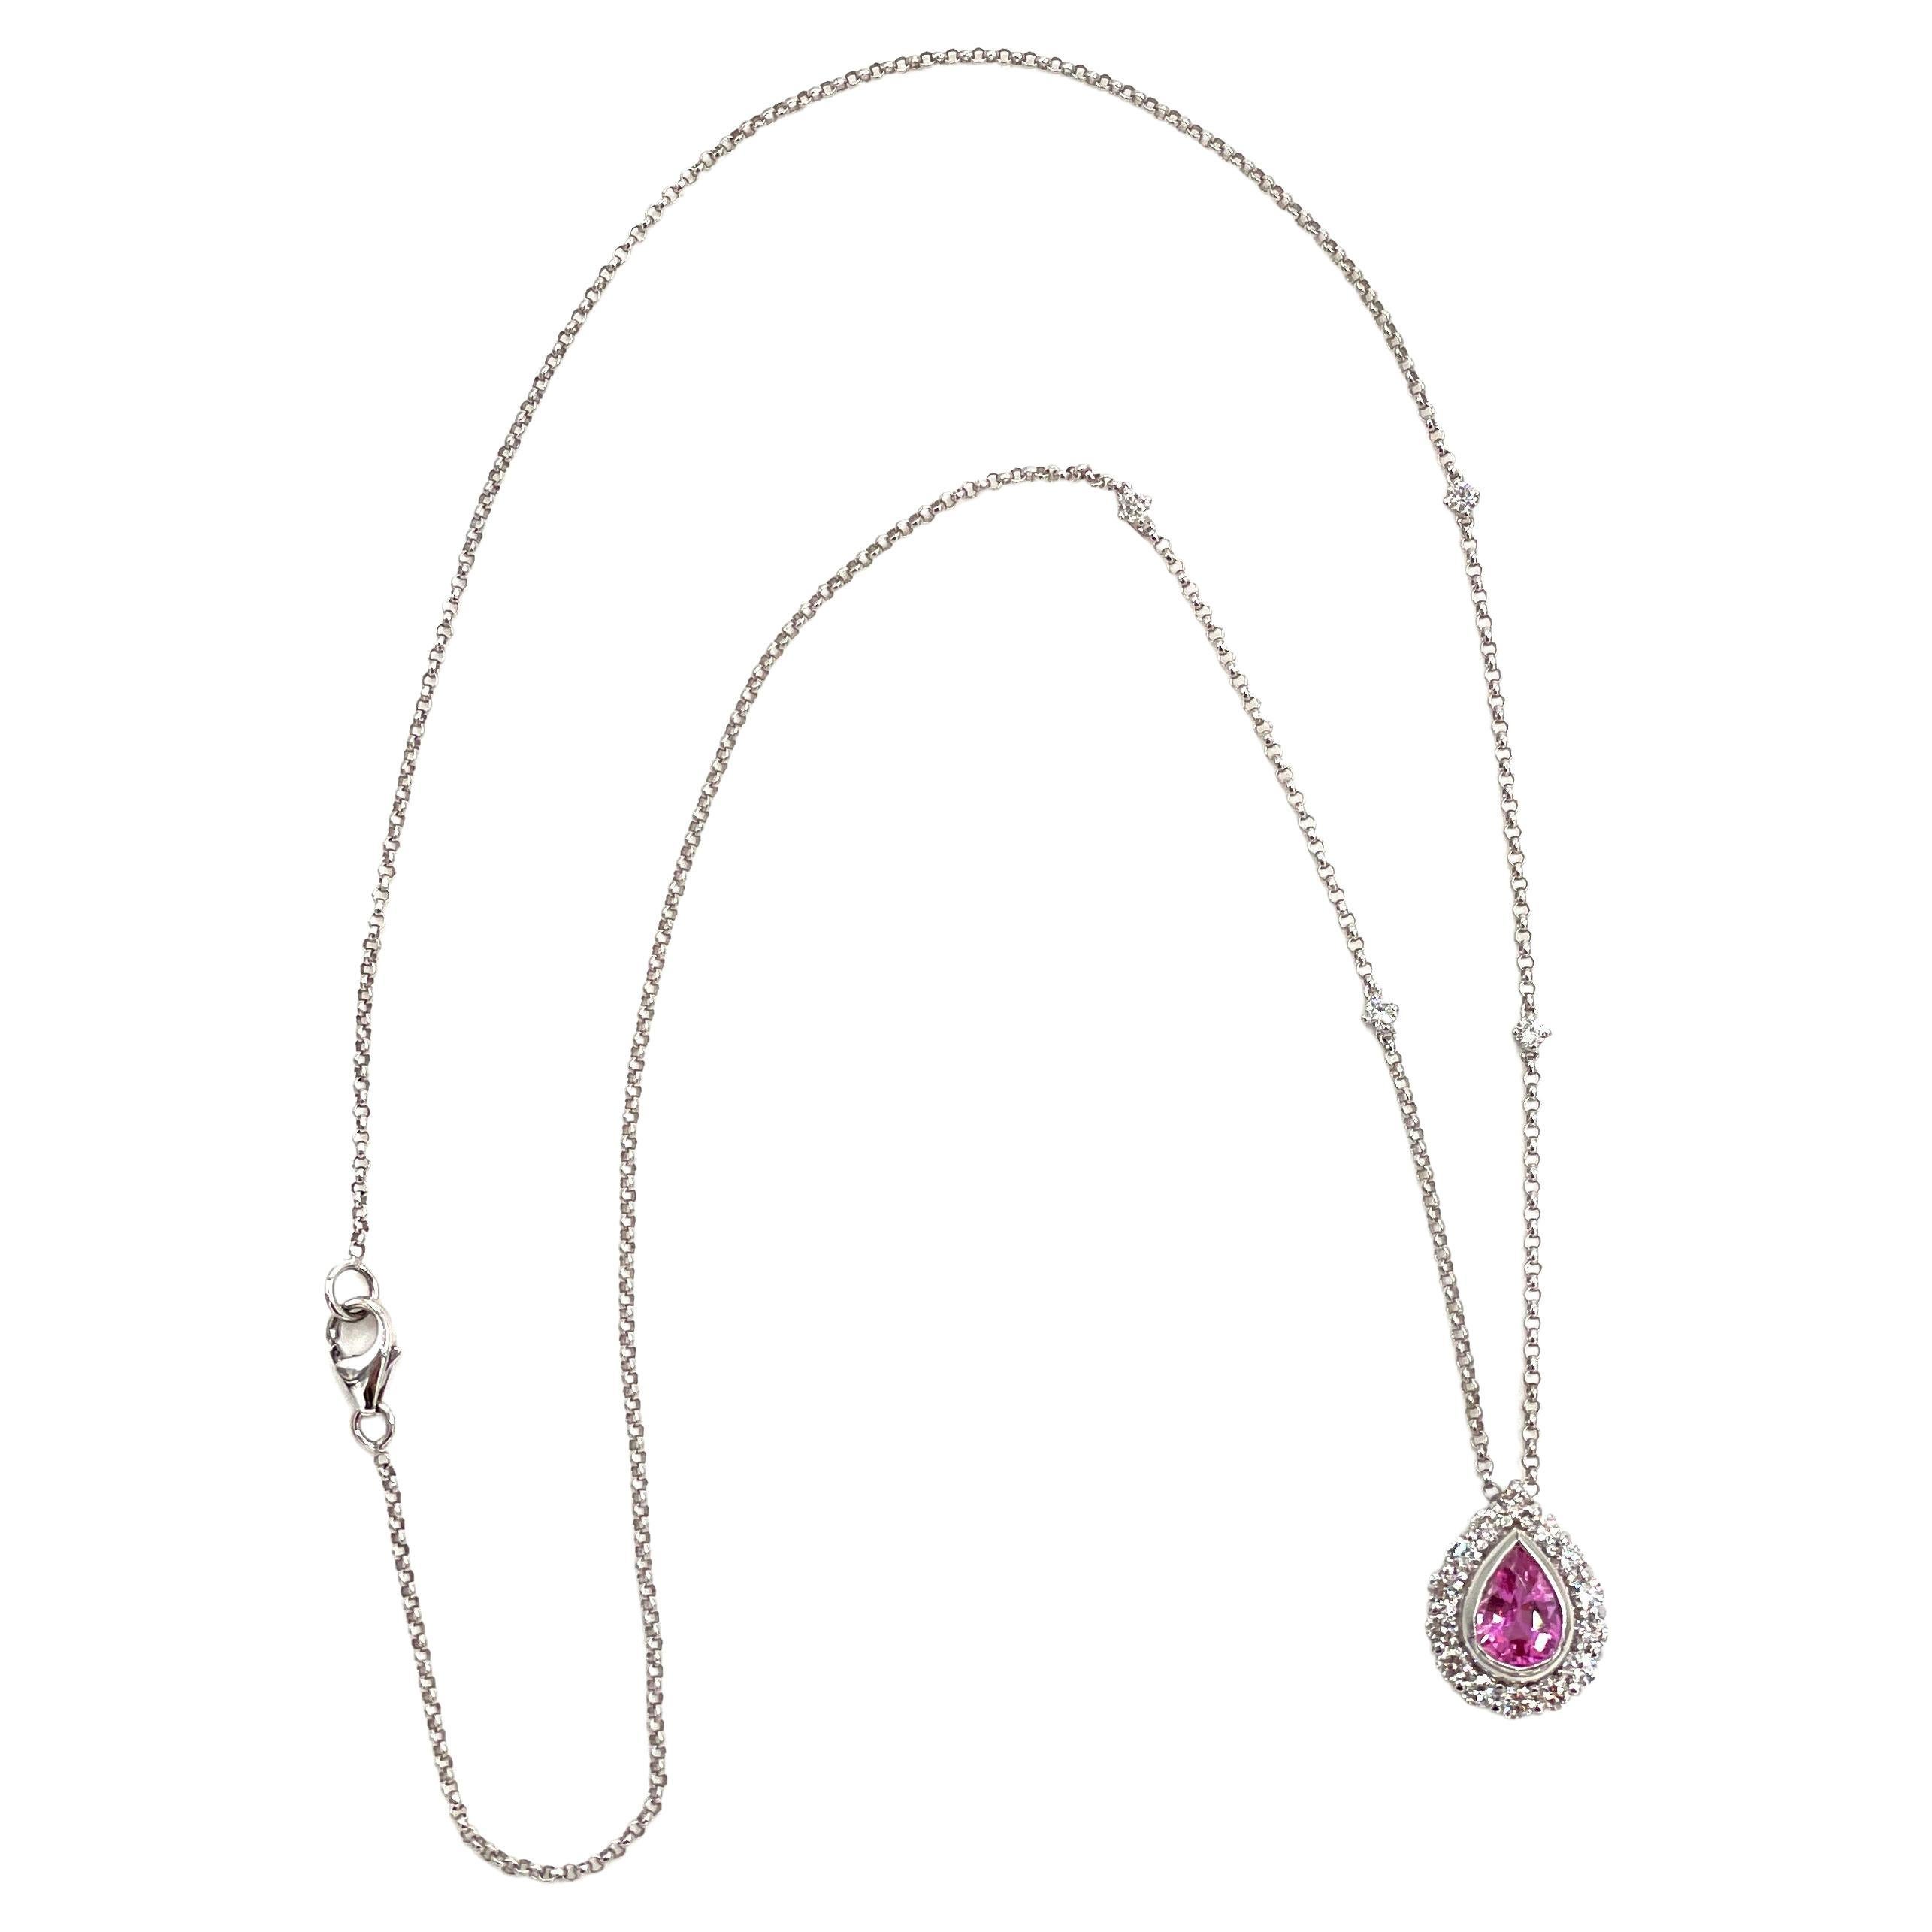 14K white gold halo pendant necklace with 18 round brilliant-cut diamonds 0.30 carats and one center bezel set pear shape pink sapphire 0.74 carats.

* 16 inches long